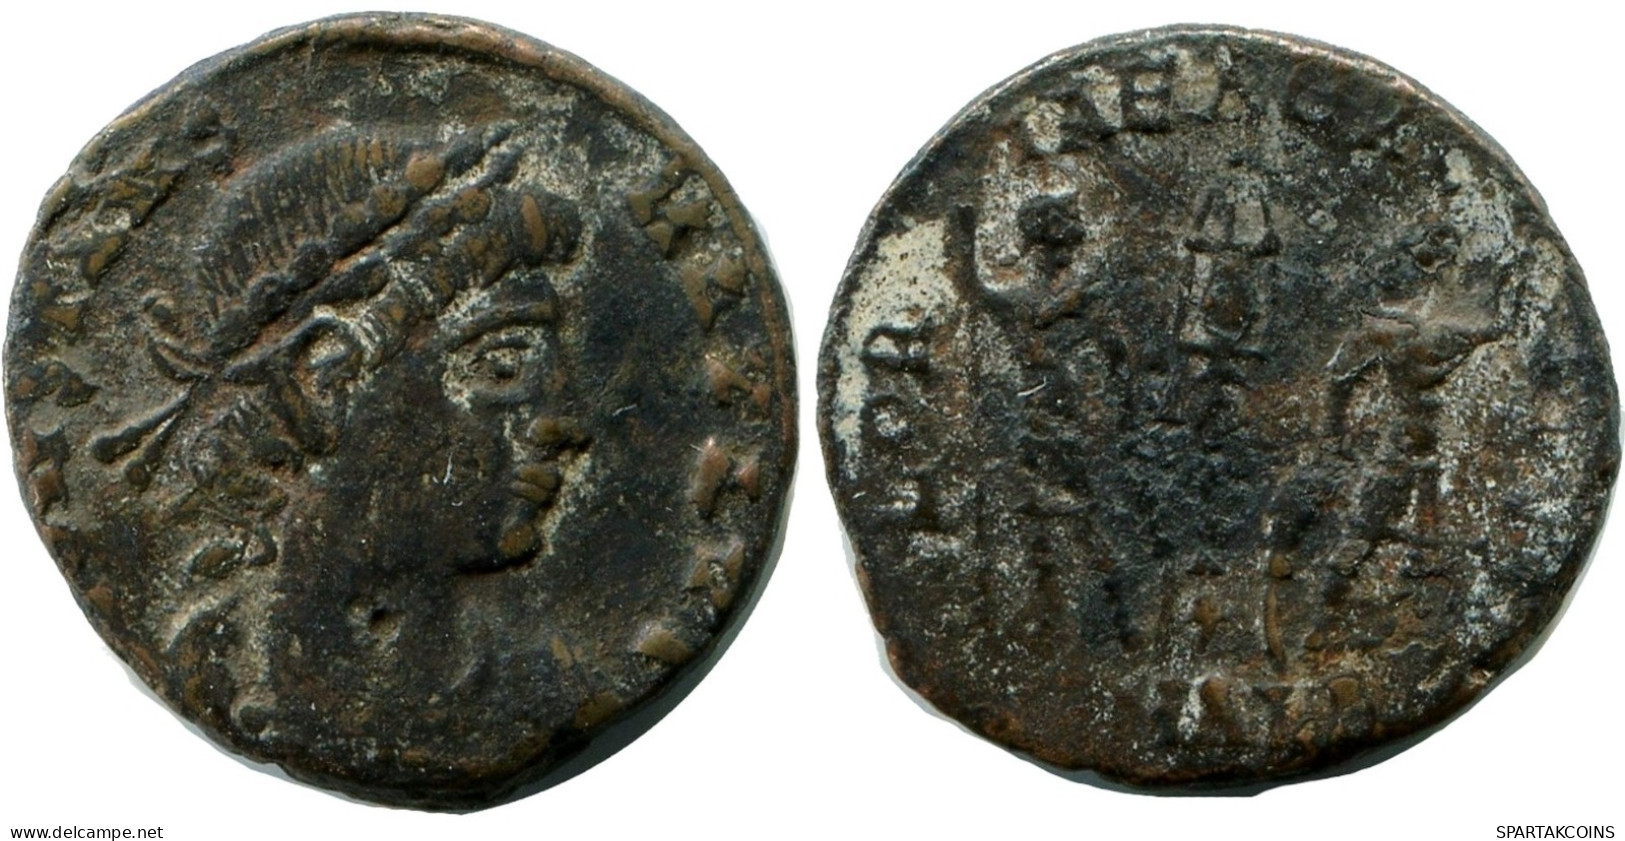 CONSTANS MINTED IN ALEKSANDRIA FOUND IN IHNASYAH HOARD EGYPT #ANC11349.14.D.A - El Impero Christiano (307 / 363)